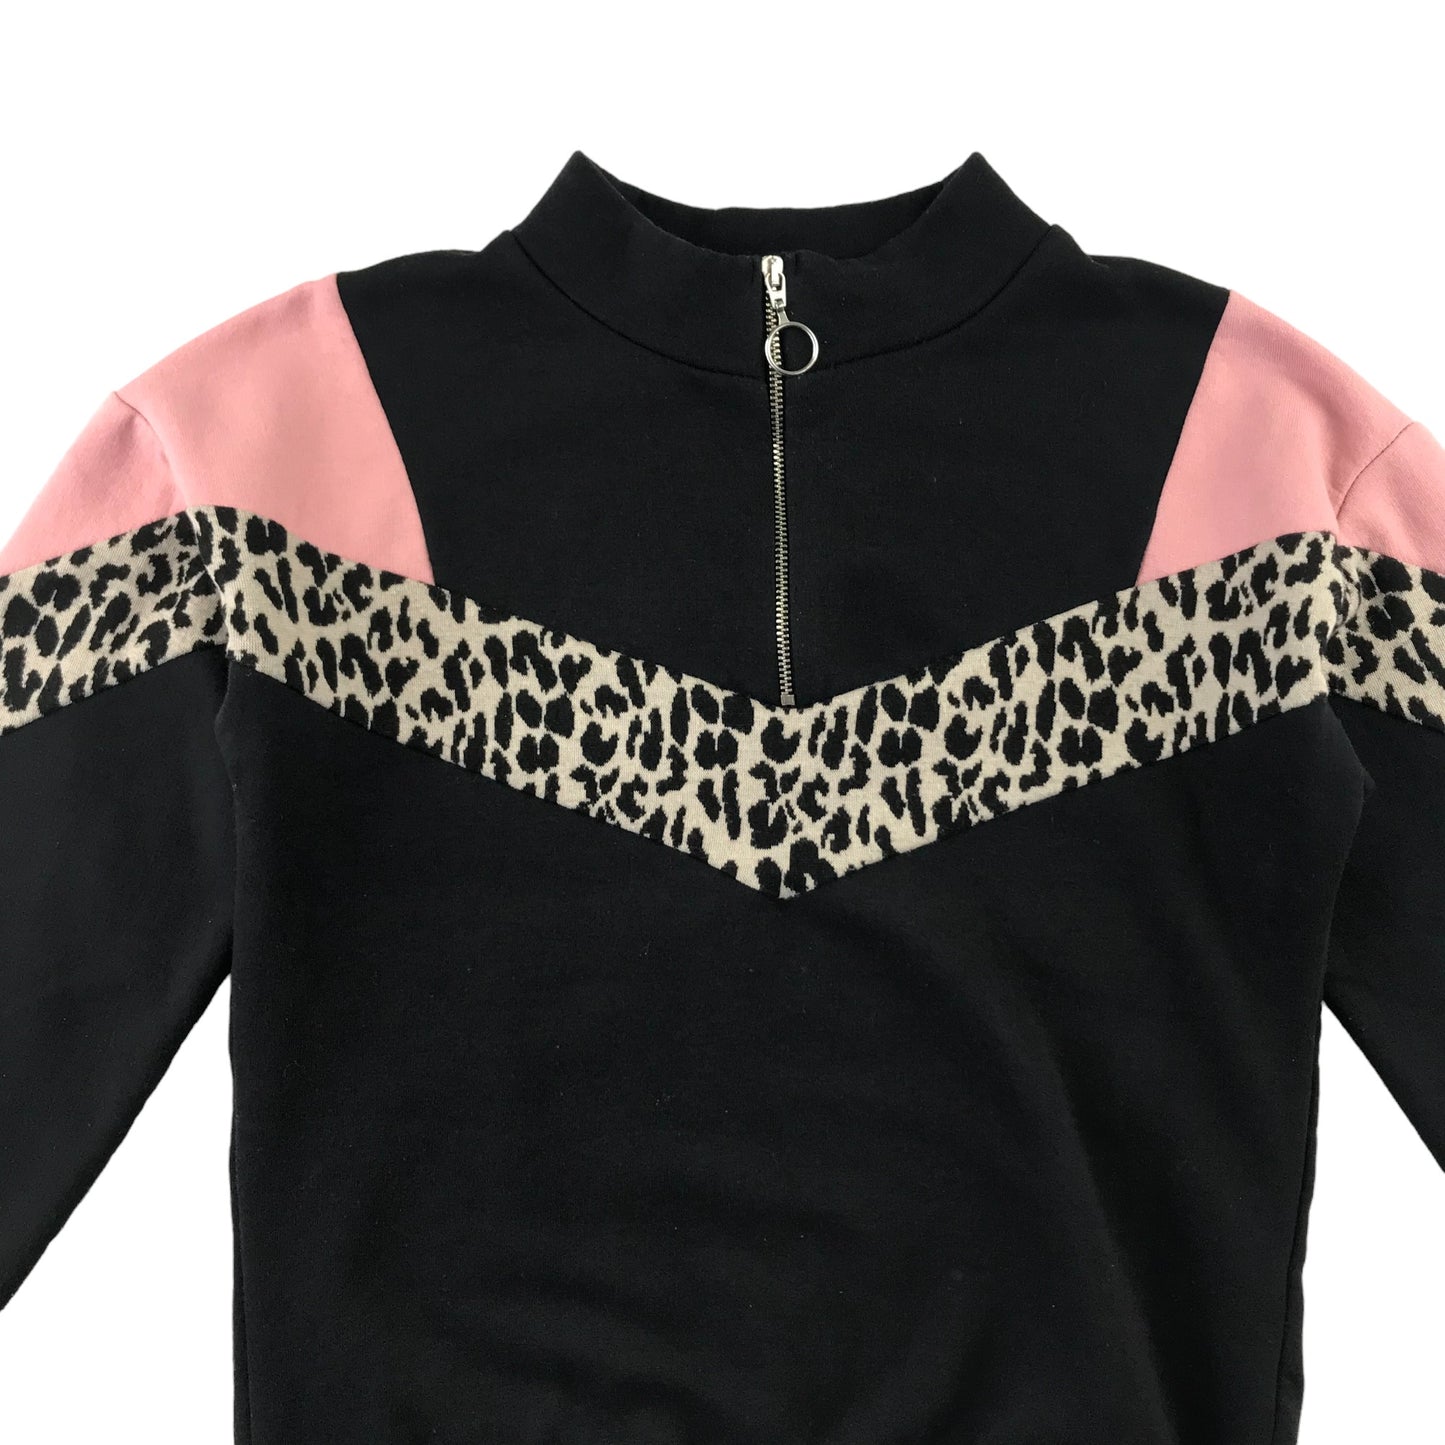 Matalan sweater 10 years black with animal print stripe though chest and pink shoulders